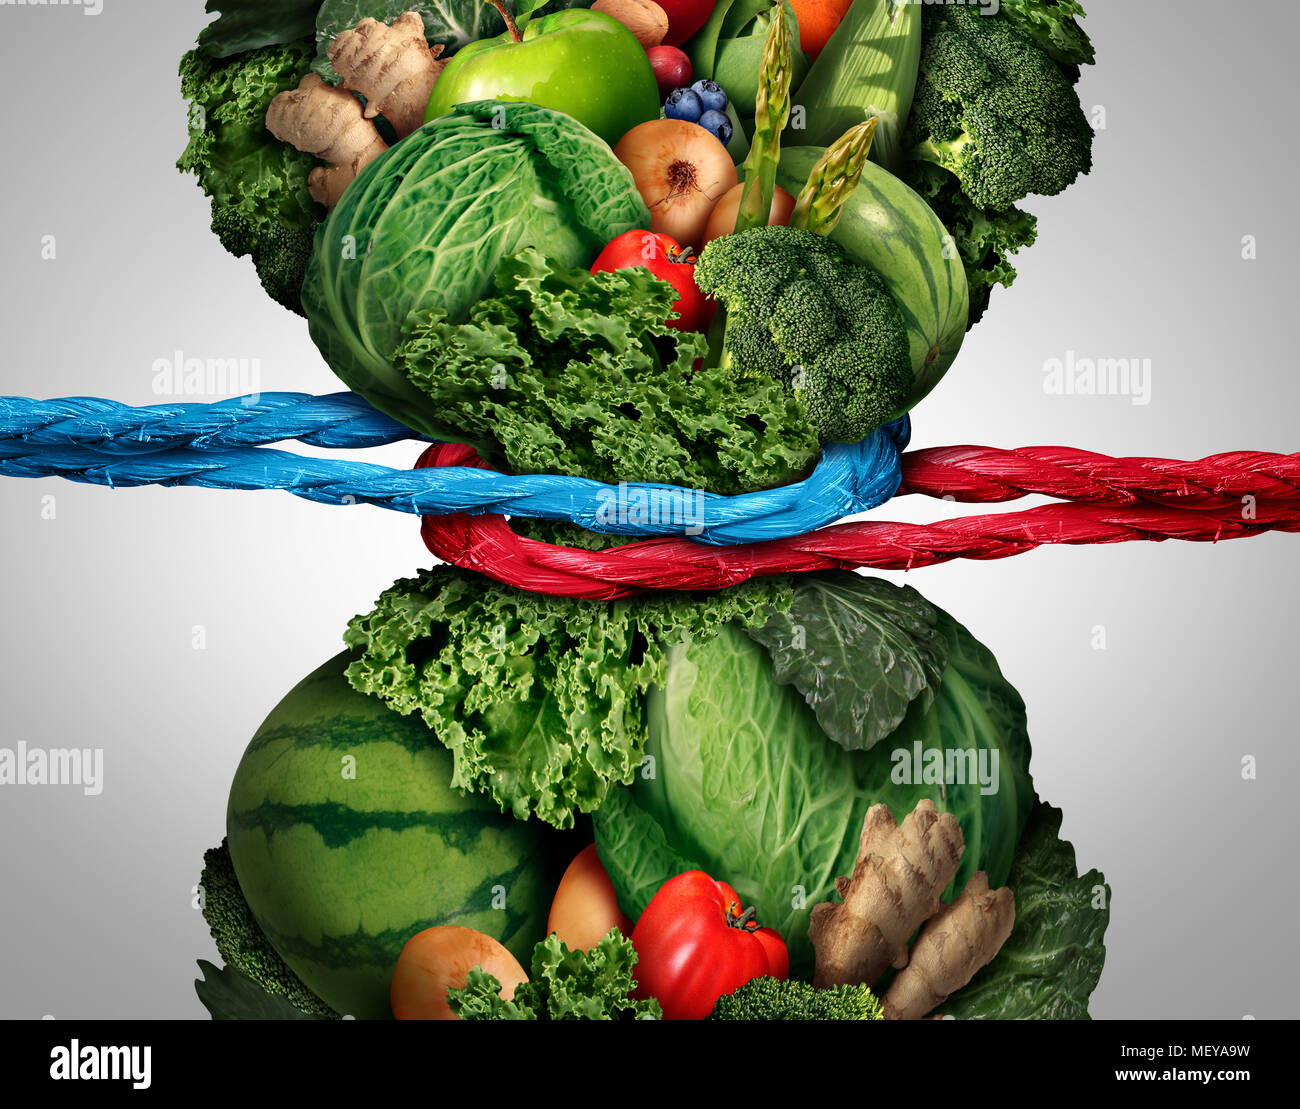 Vegetarian struggle and vegan eating habits or nutrition challenge as a healthy fresh food dieting concept. Stock Photo